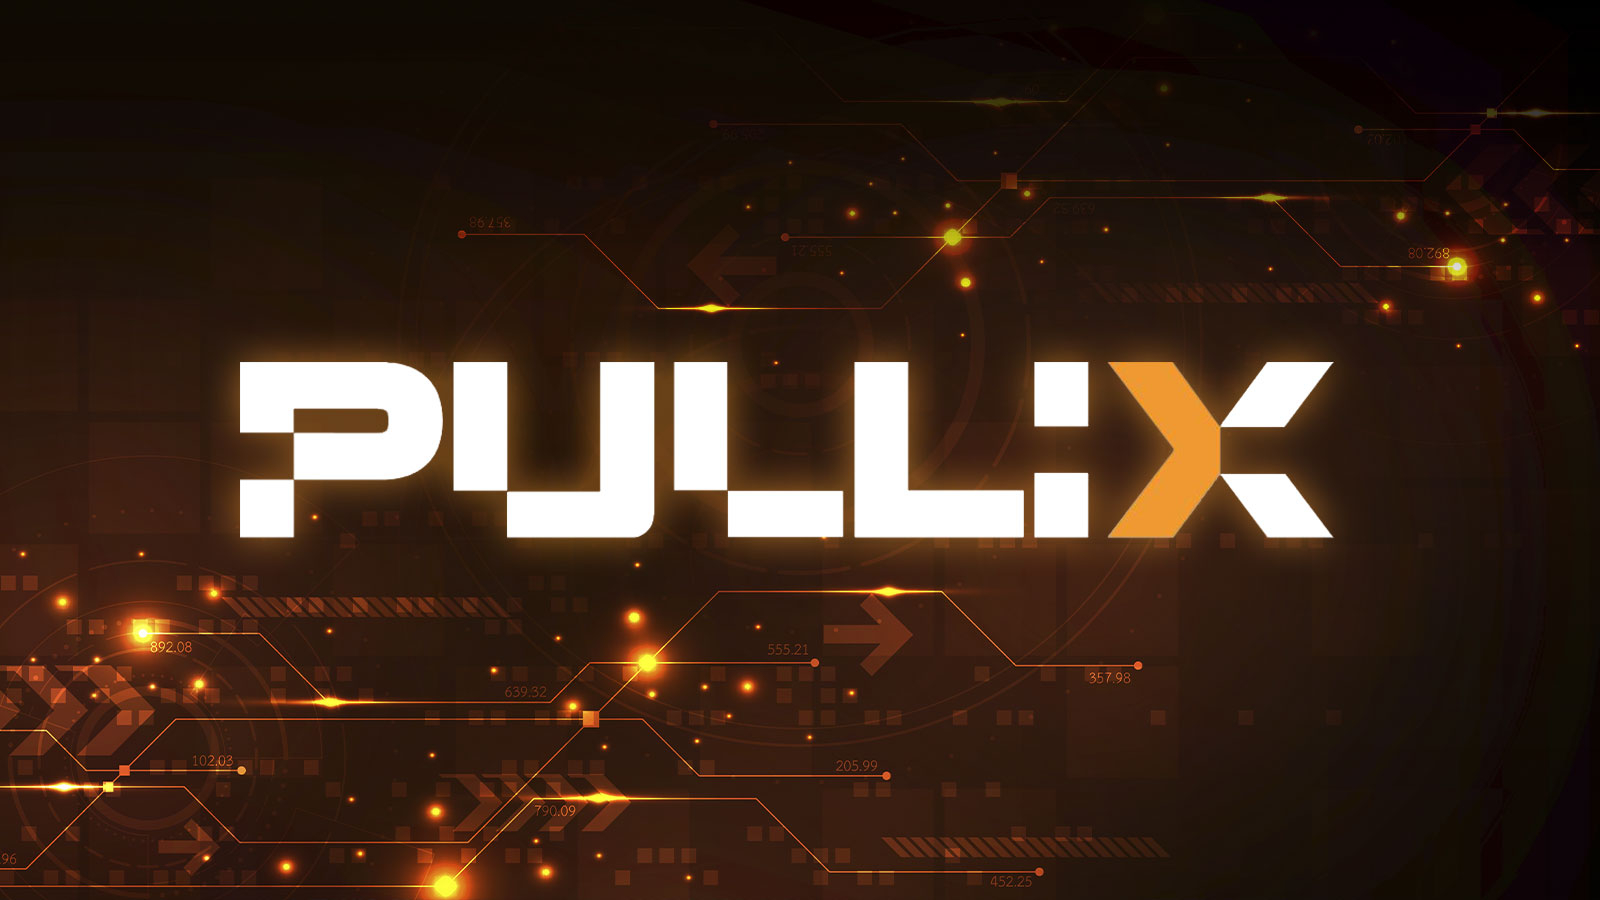 Pullix (PLX) Tokensale Makes Traders Enthusiastic, as Bonk (BONK) and Ankr (ANKR) Communities Getting Ready for Volatility